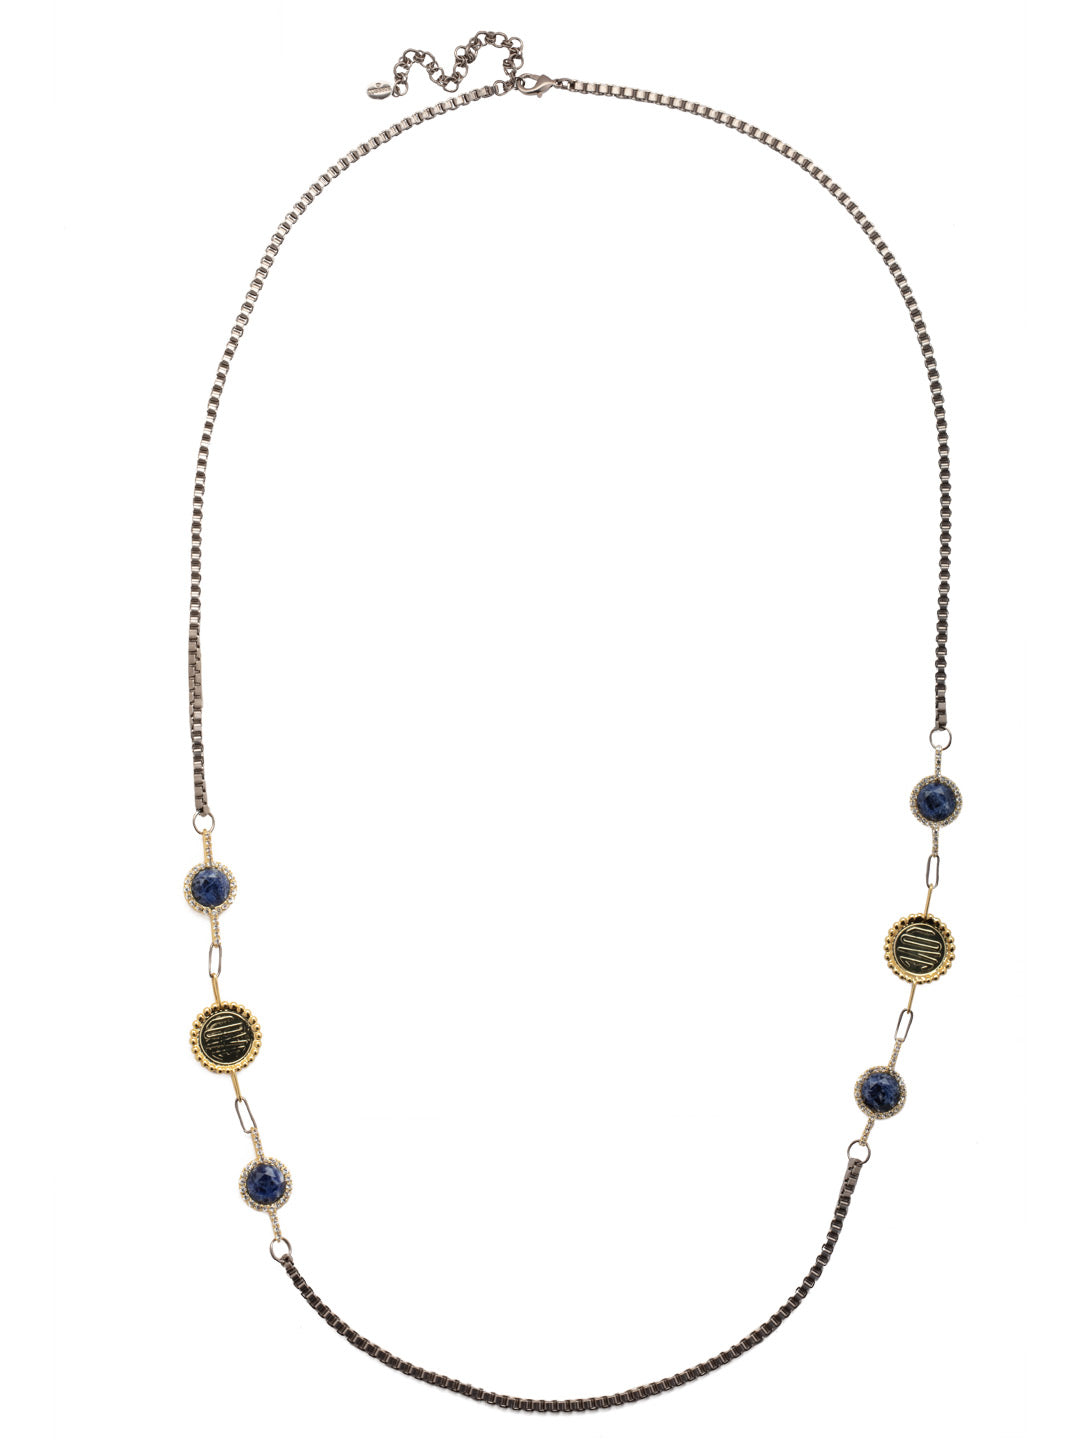 Luvie Long Necklace - NFA3MXIND - <p>There is lots to LOVE about the Luvie Long Necklace. A box chain features colorful round stones set in a cushion of crystals and our popular love coins. From Sorrelli's Industrial collection in our Mixed Metal finish.</p>